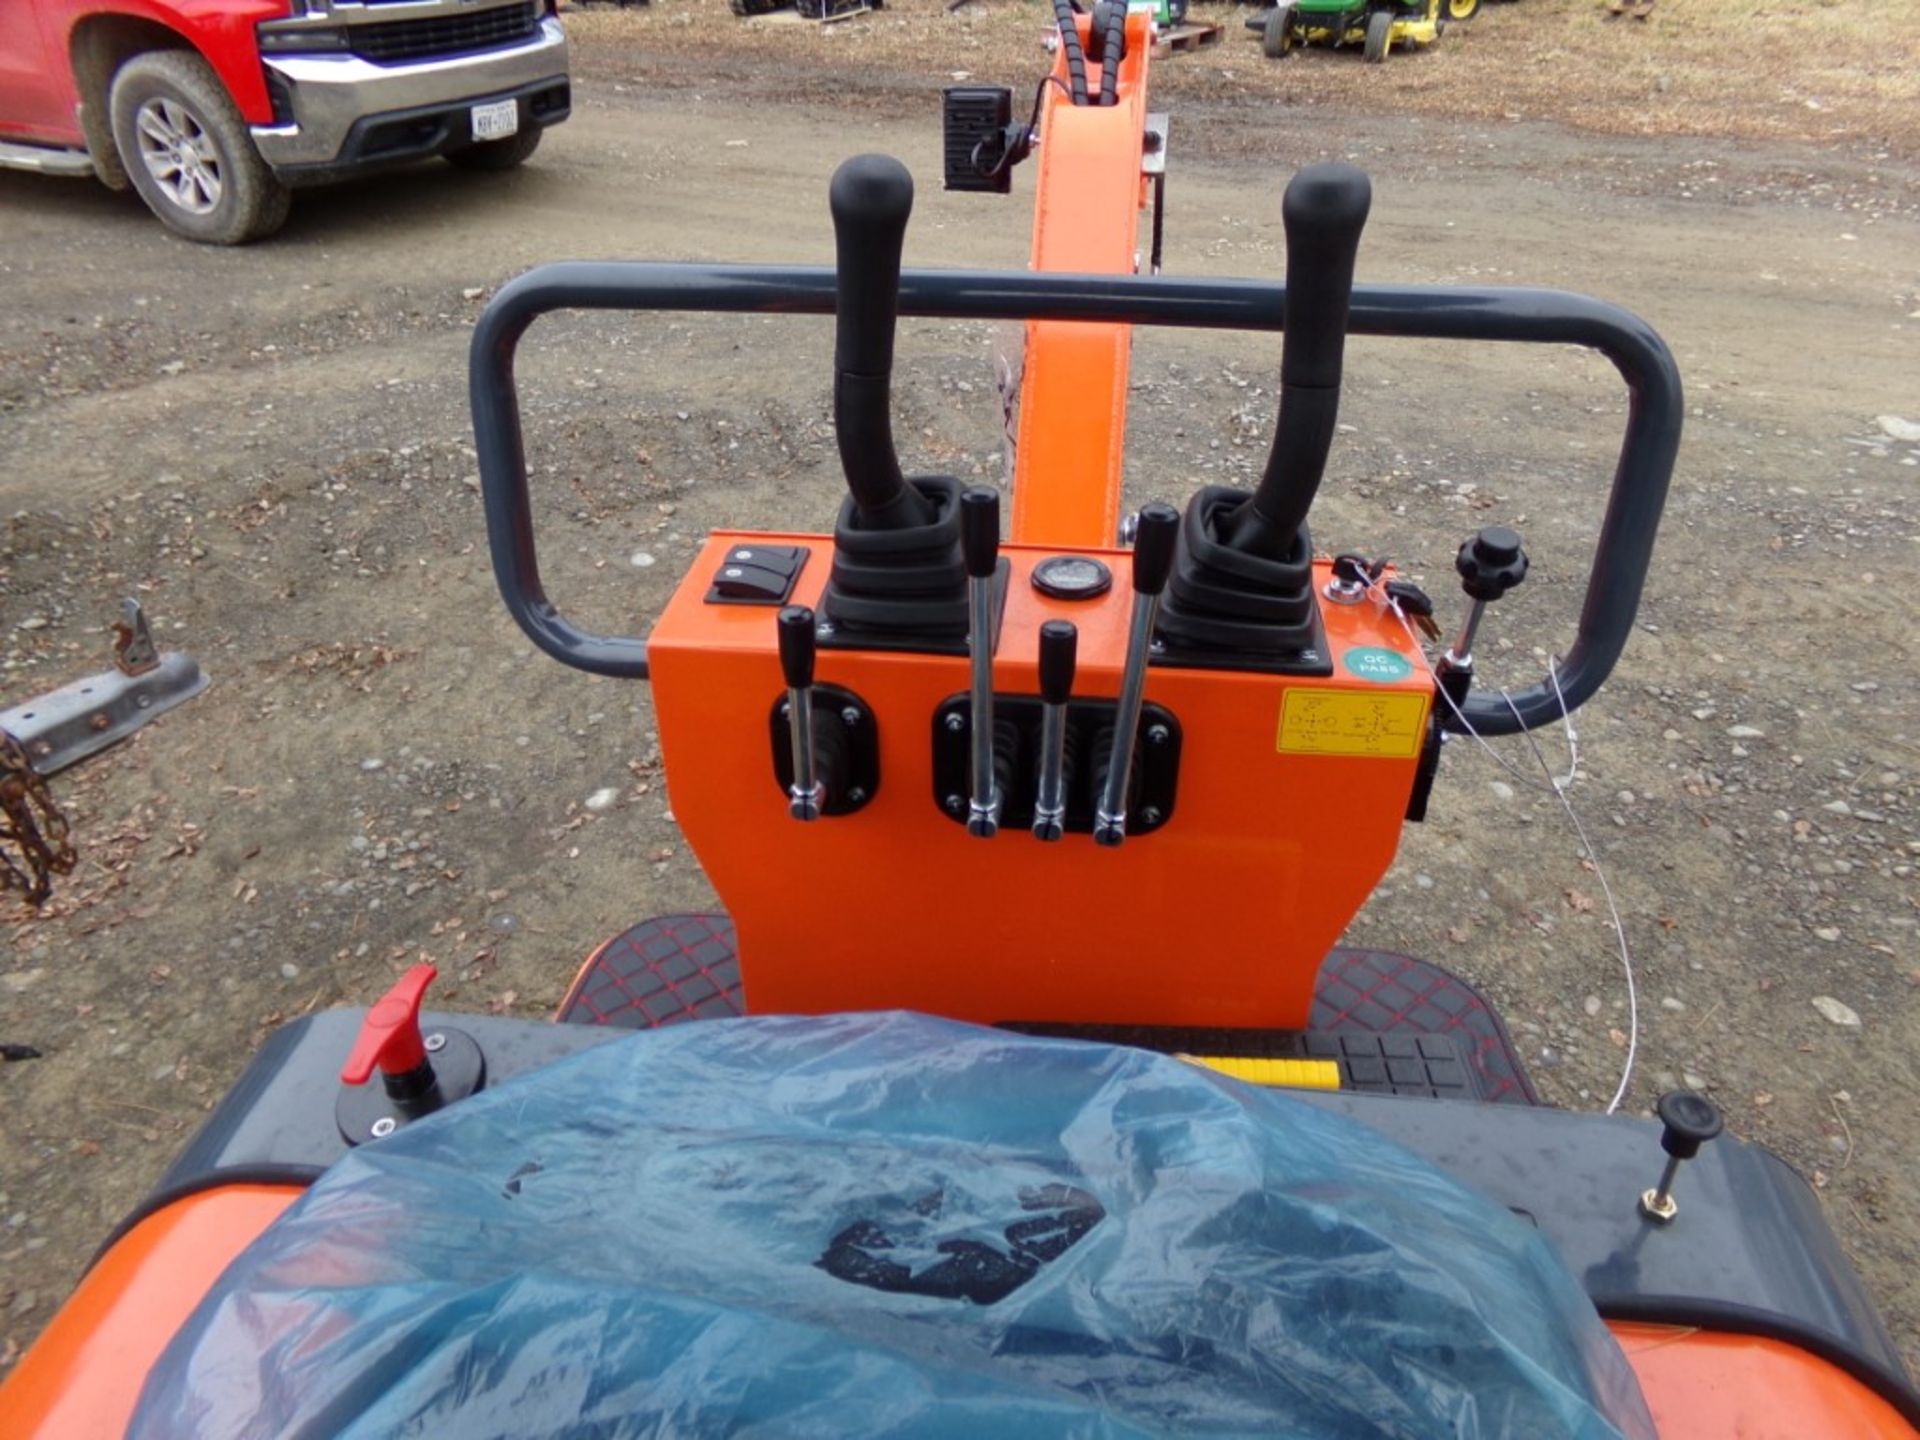 New AGT L12 Mini Excavator with Canopy, Has Manual Thumb, Orange, Ser # 633466 - Image 4 of 4